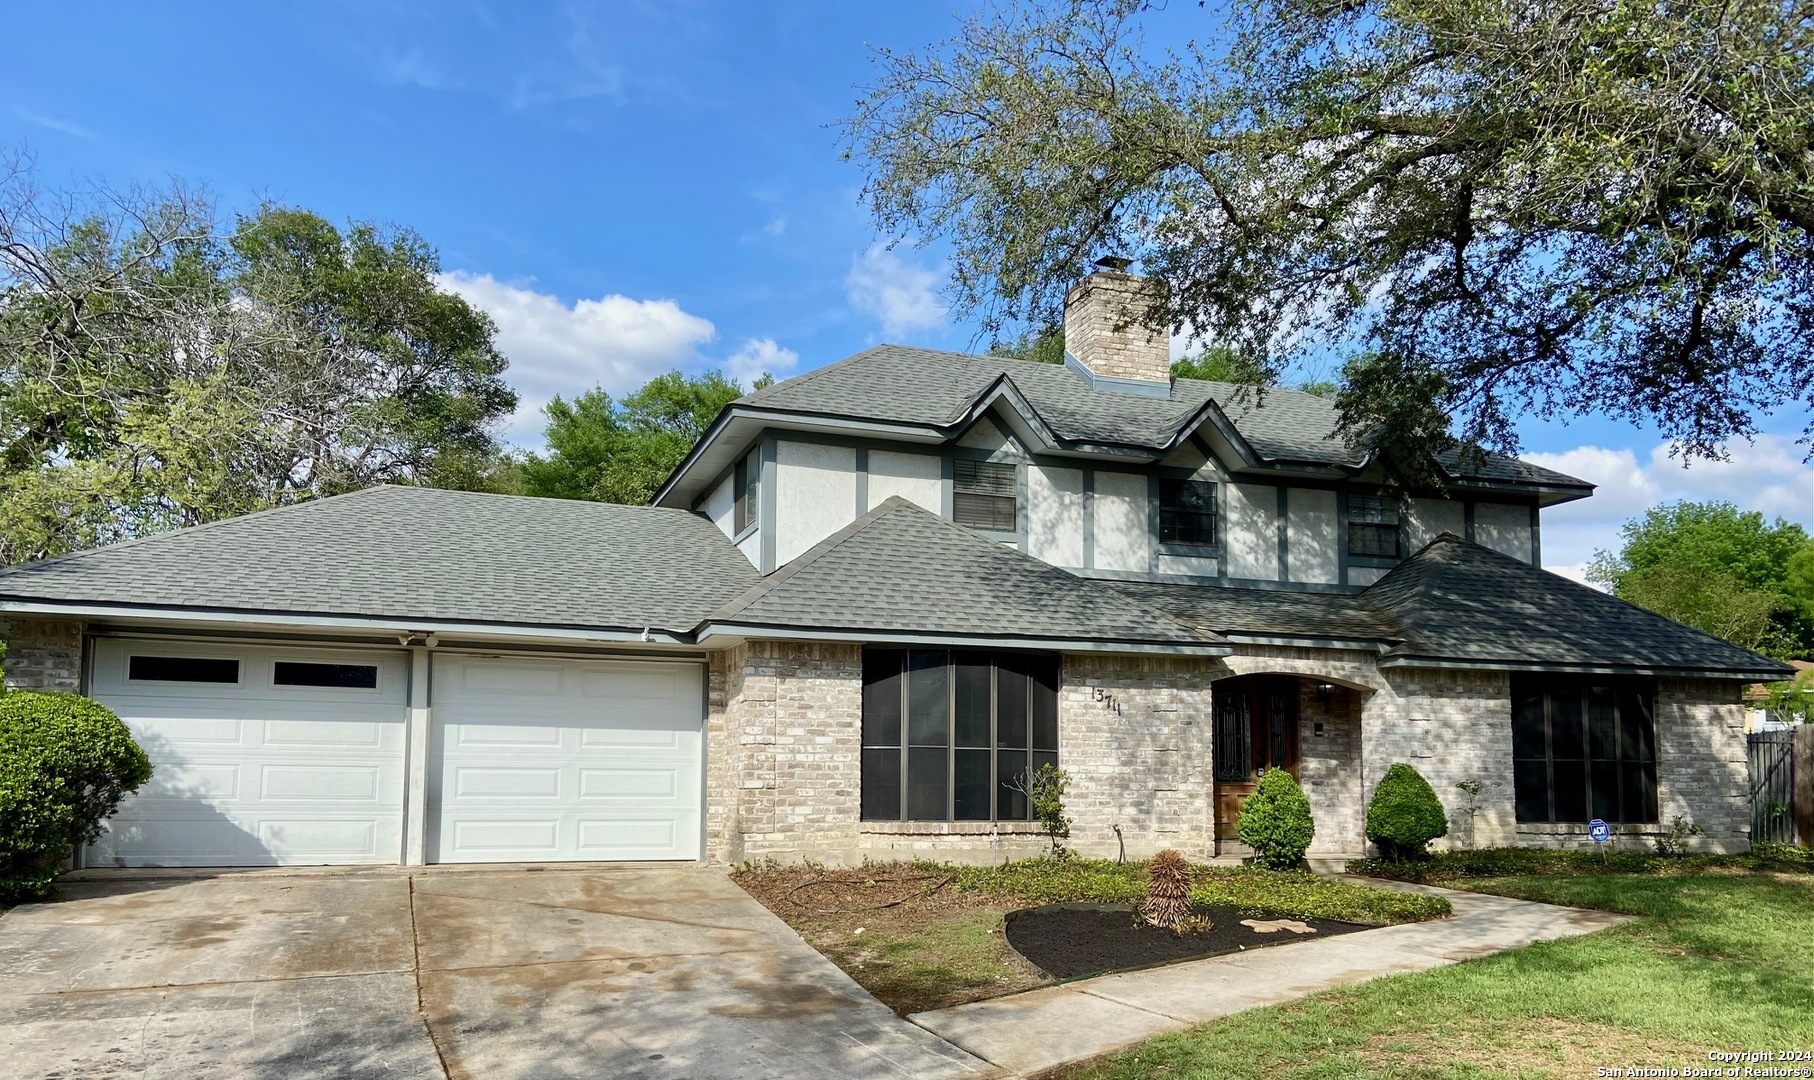 Photo of 13711 Scarsdale St in San Antonio, TX